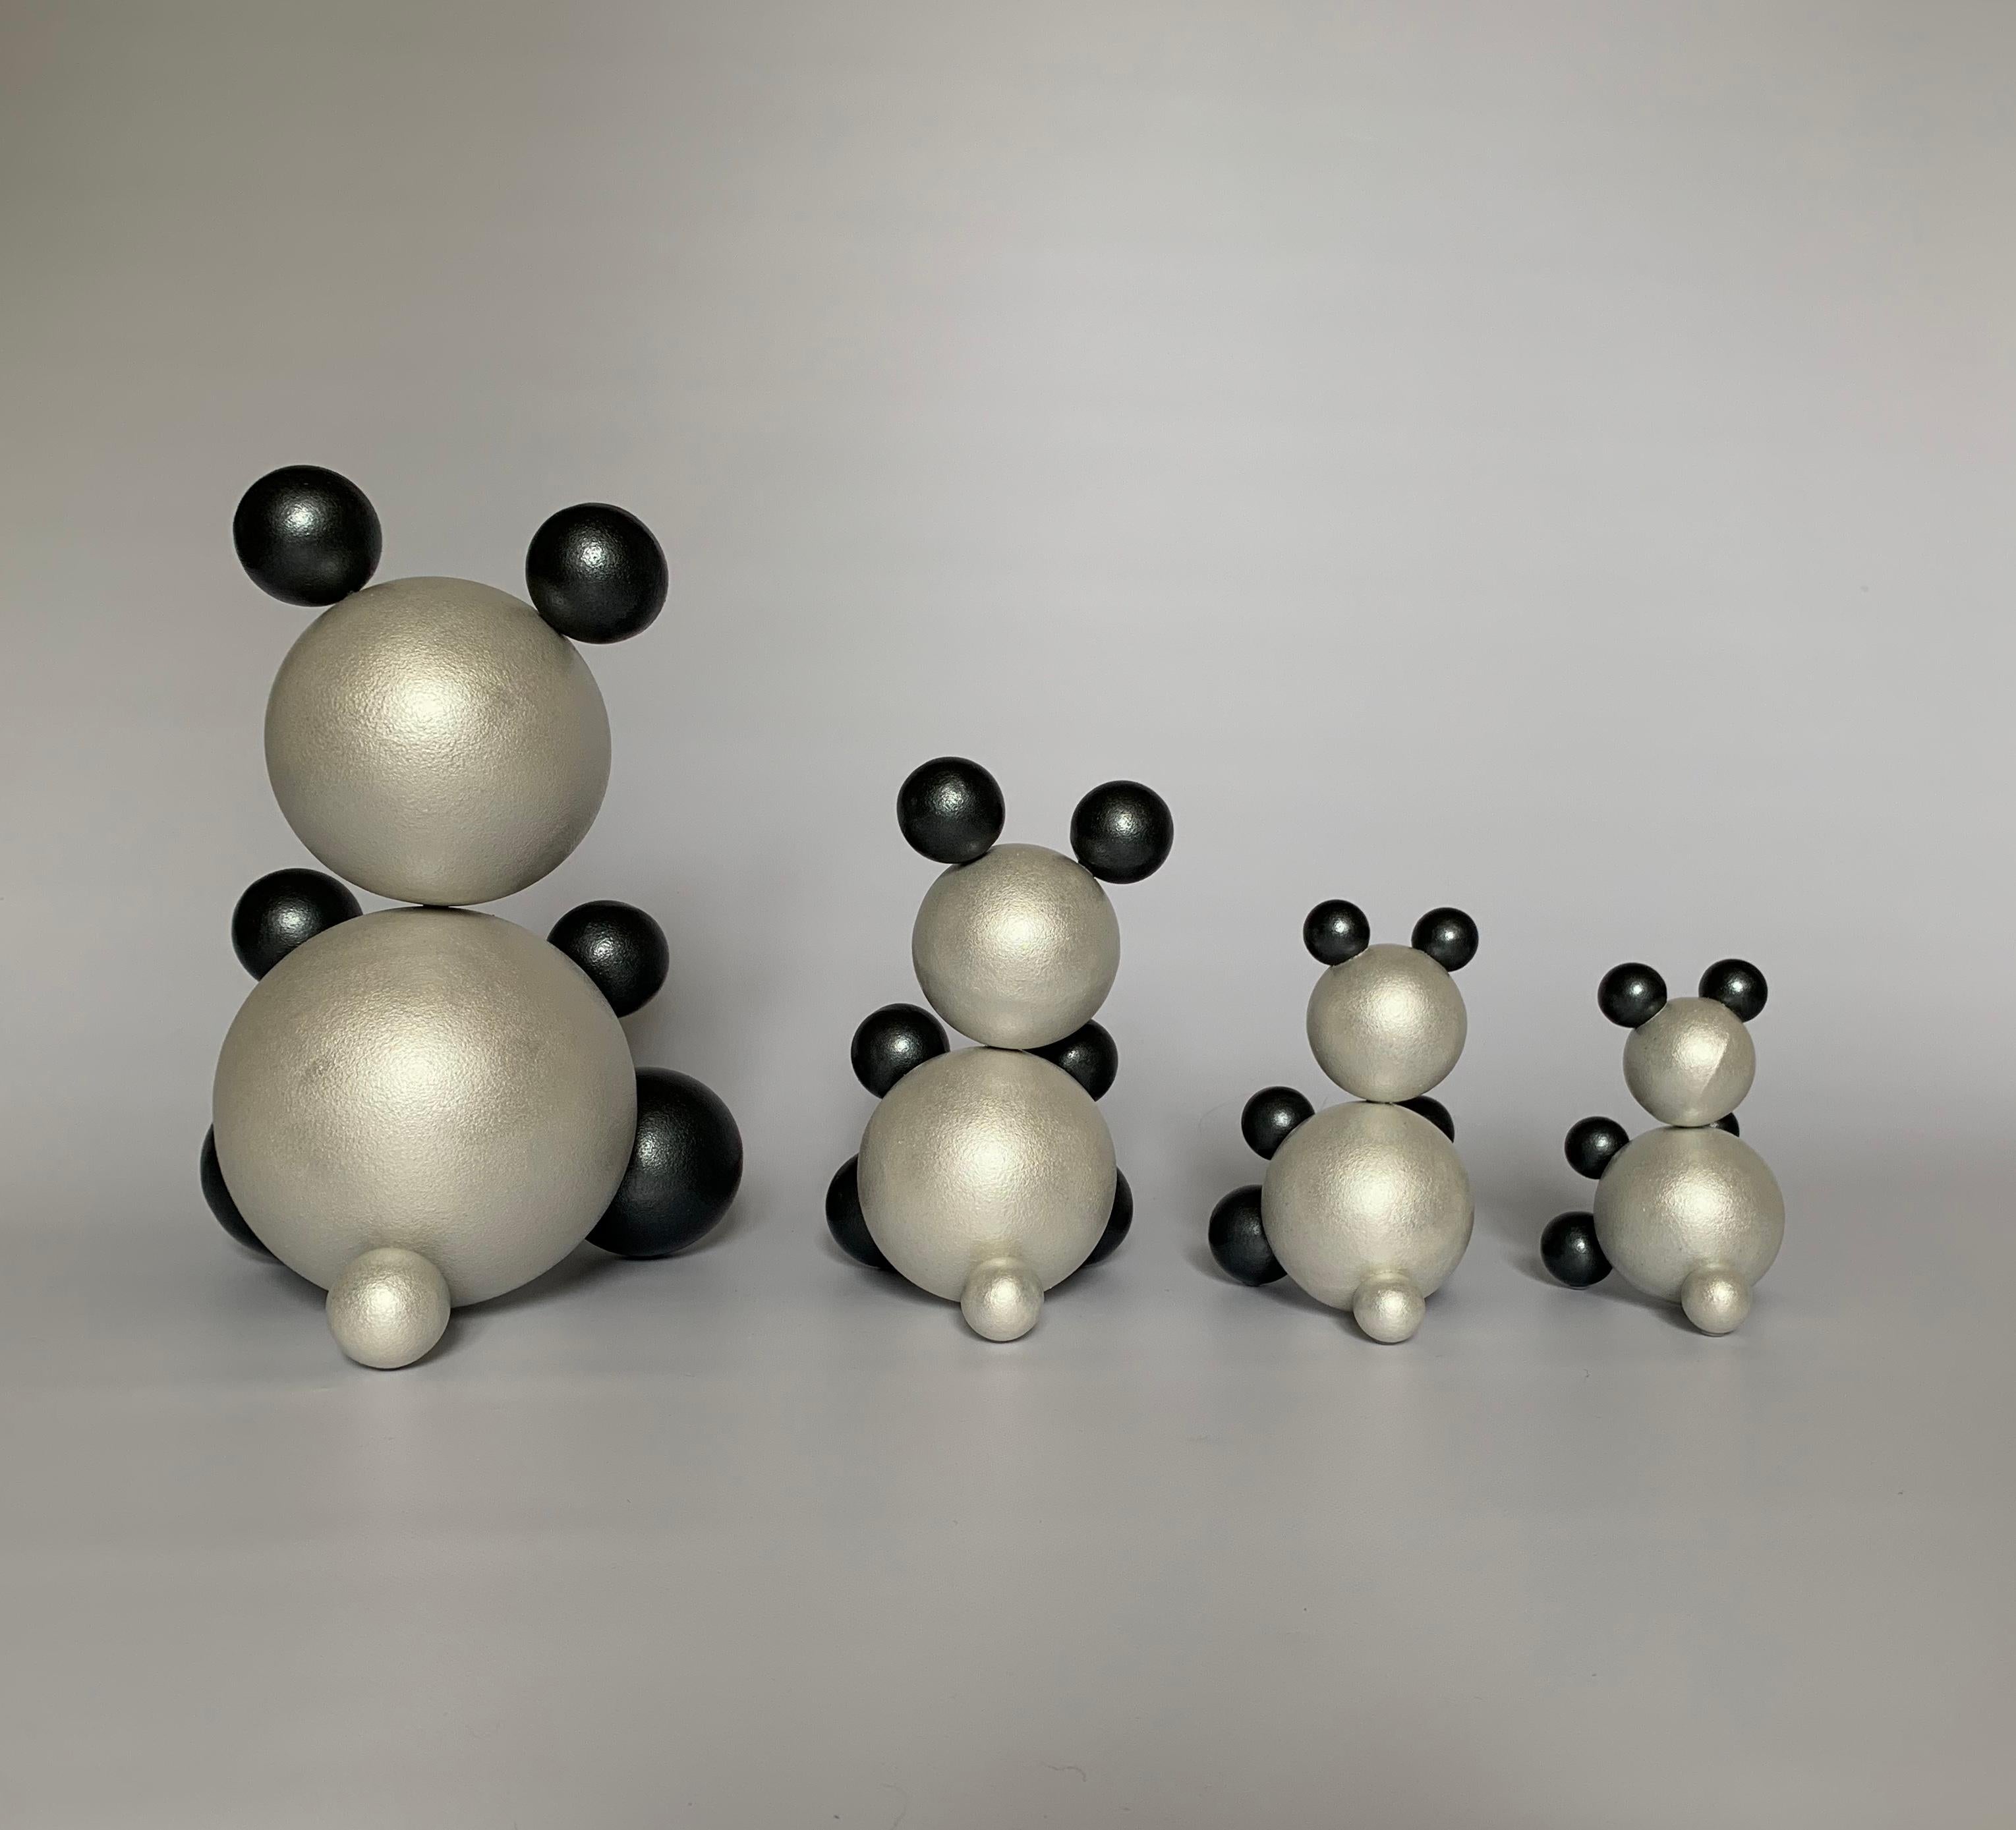 Art is the best gift, isn't it?
Do you like bears? Look at these tiny ears and tails! And look at their fur... Aren't they sweet candy? A metal bear covered by acrylic is a sample of minimal contemporary sculpture. Every bear has a metal emblem with